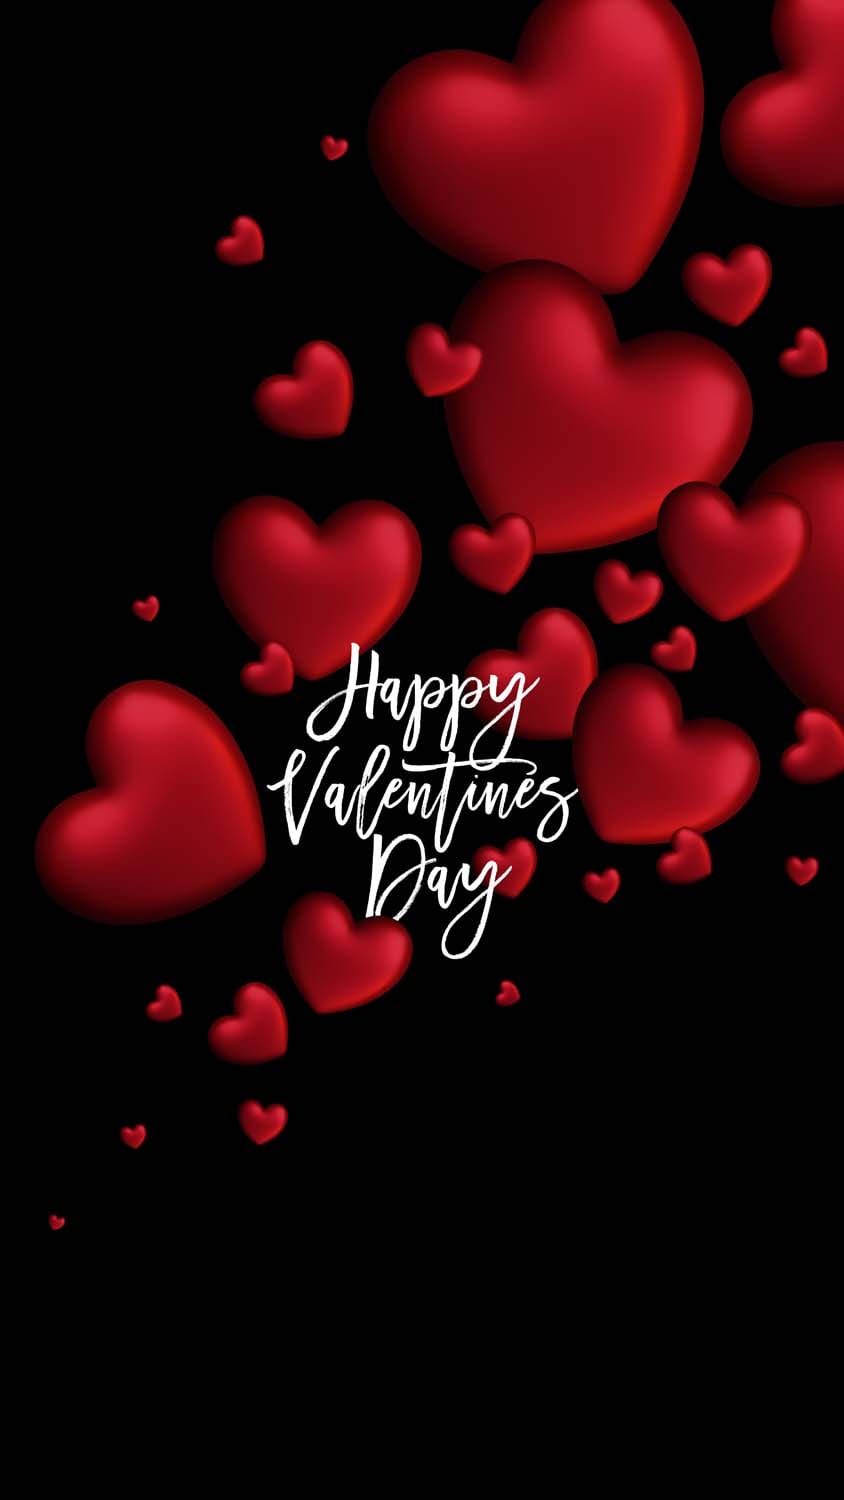 Happy Valentines Day IPhone Wallpaper HD - IPhone Wallpapers : iPhone  Wallpapers